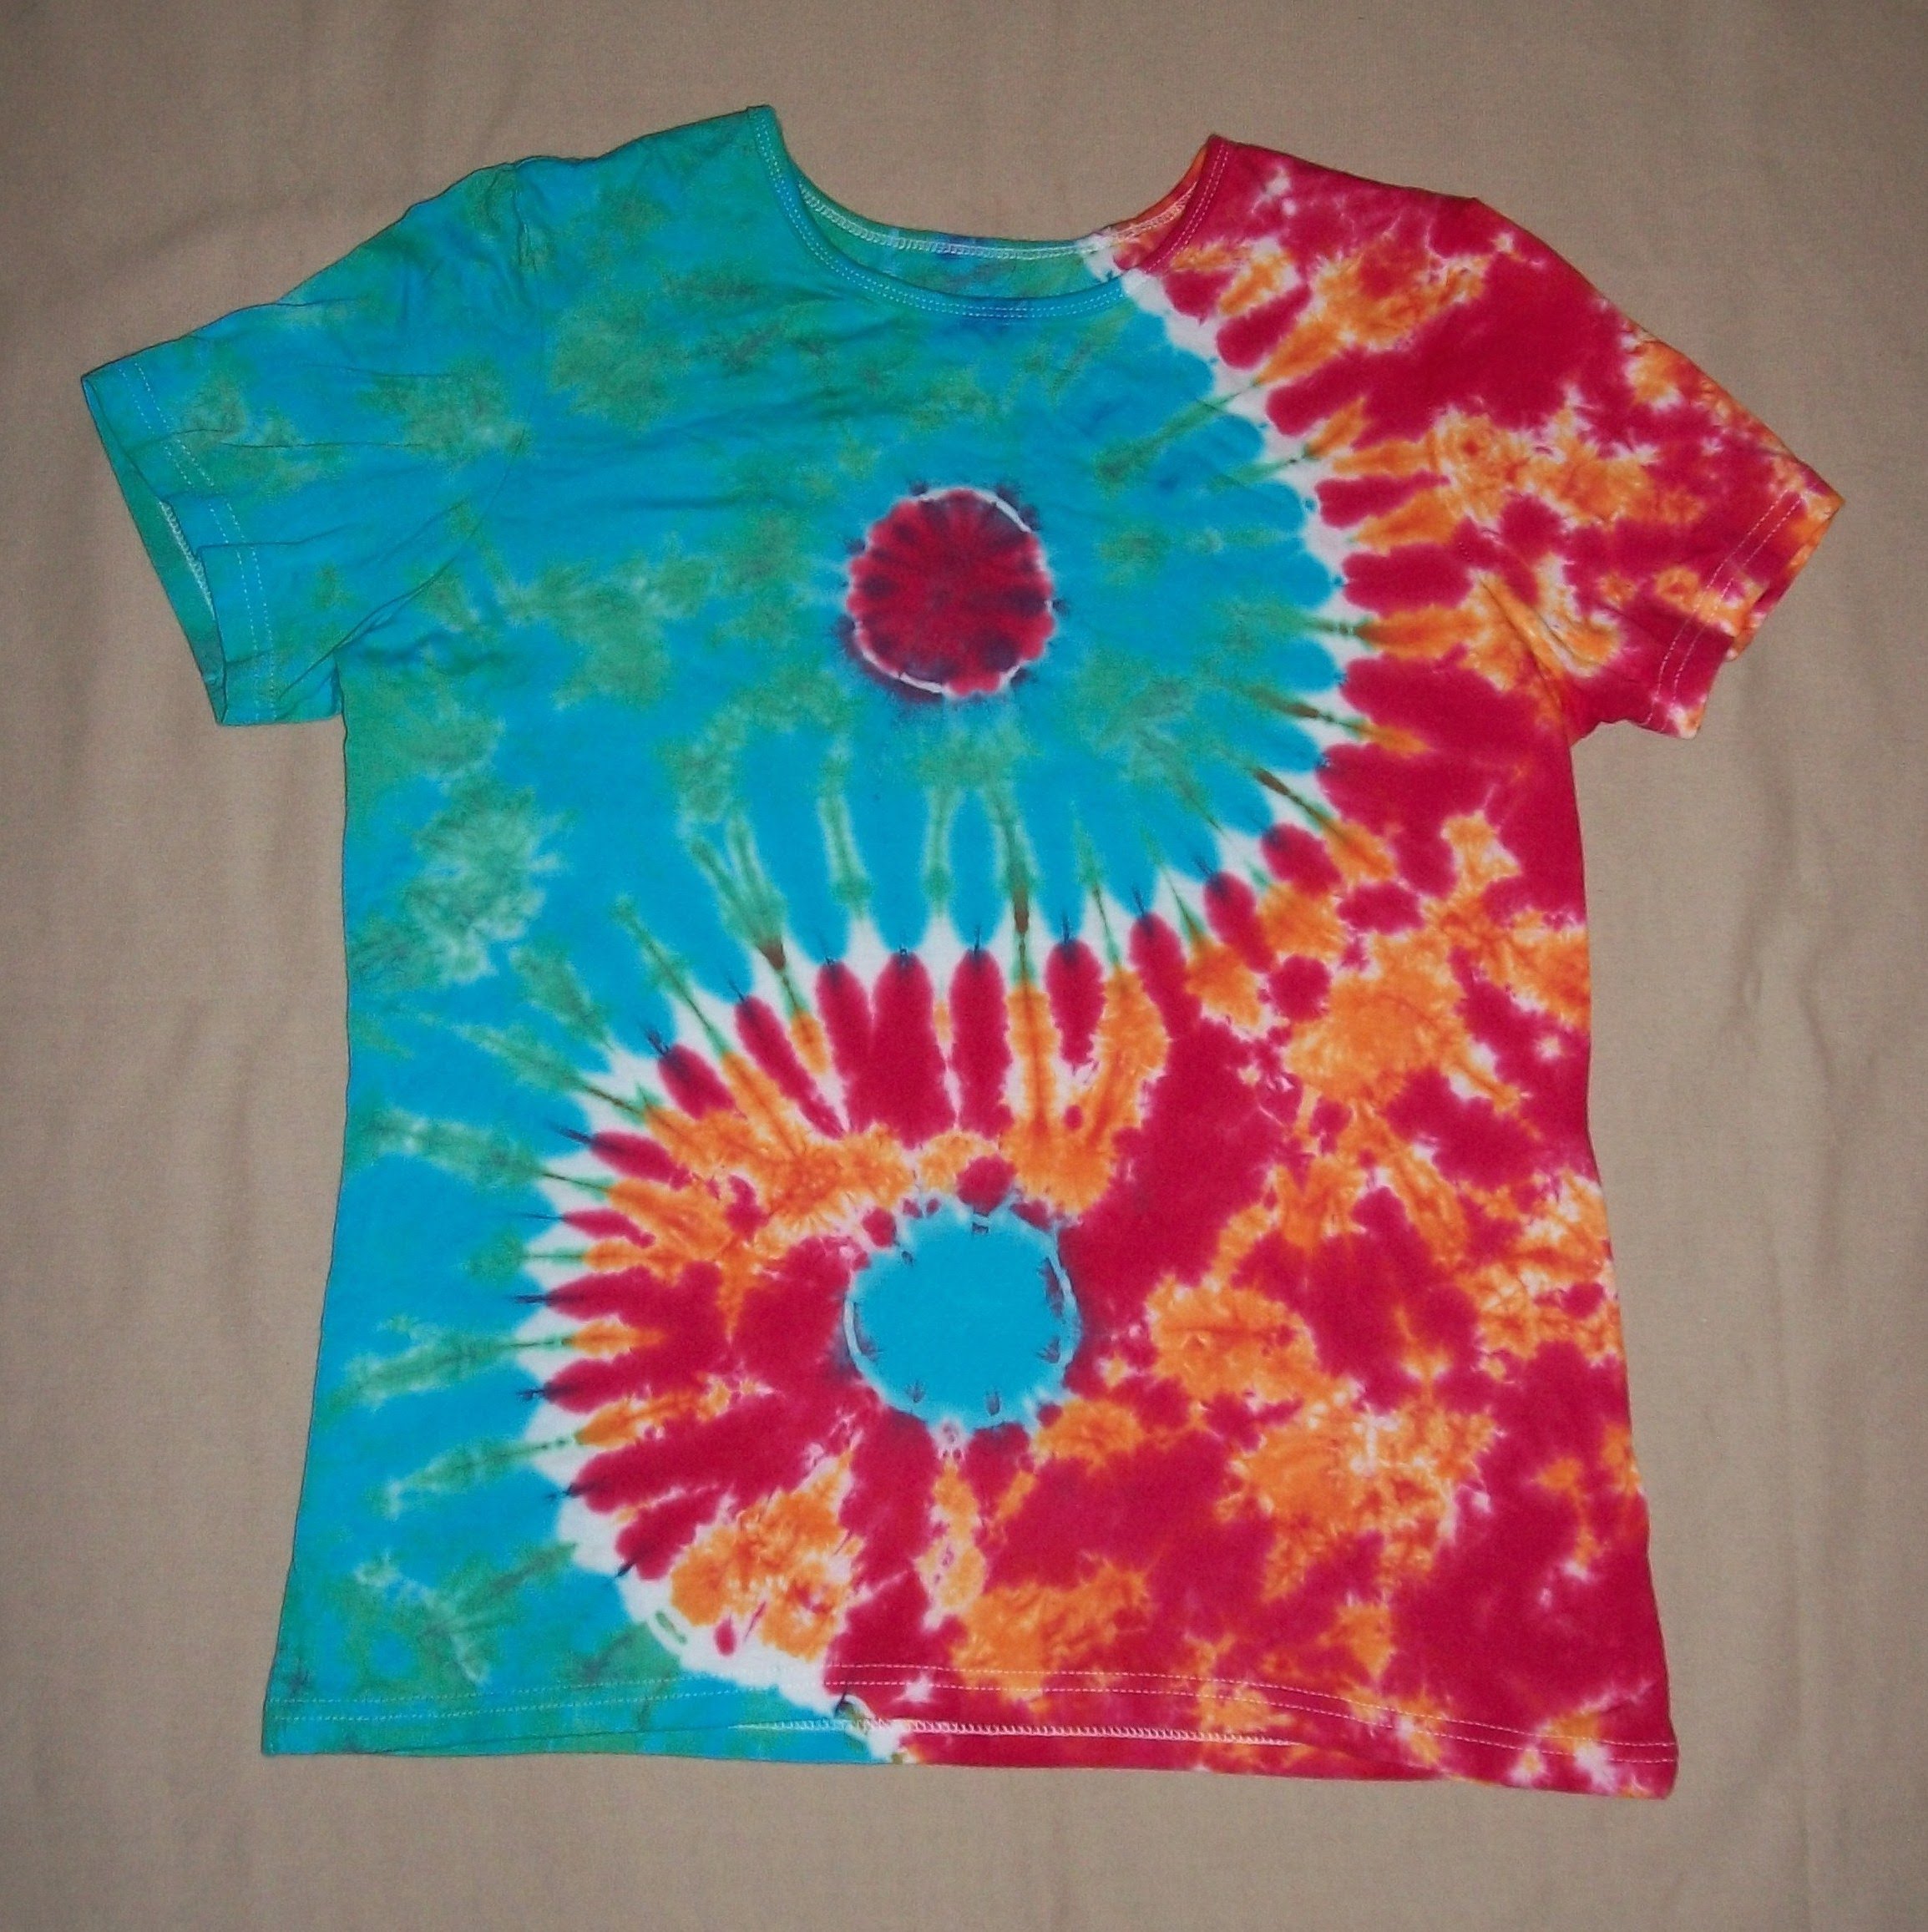 How To Make Tie Dye Shirts Outlet 53